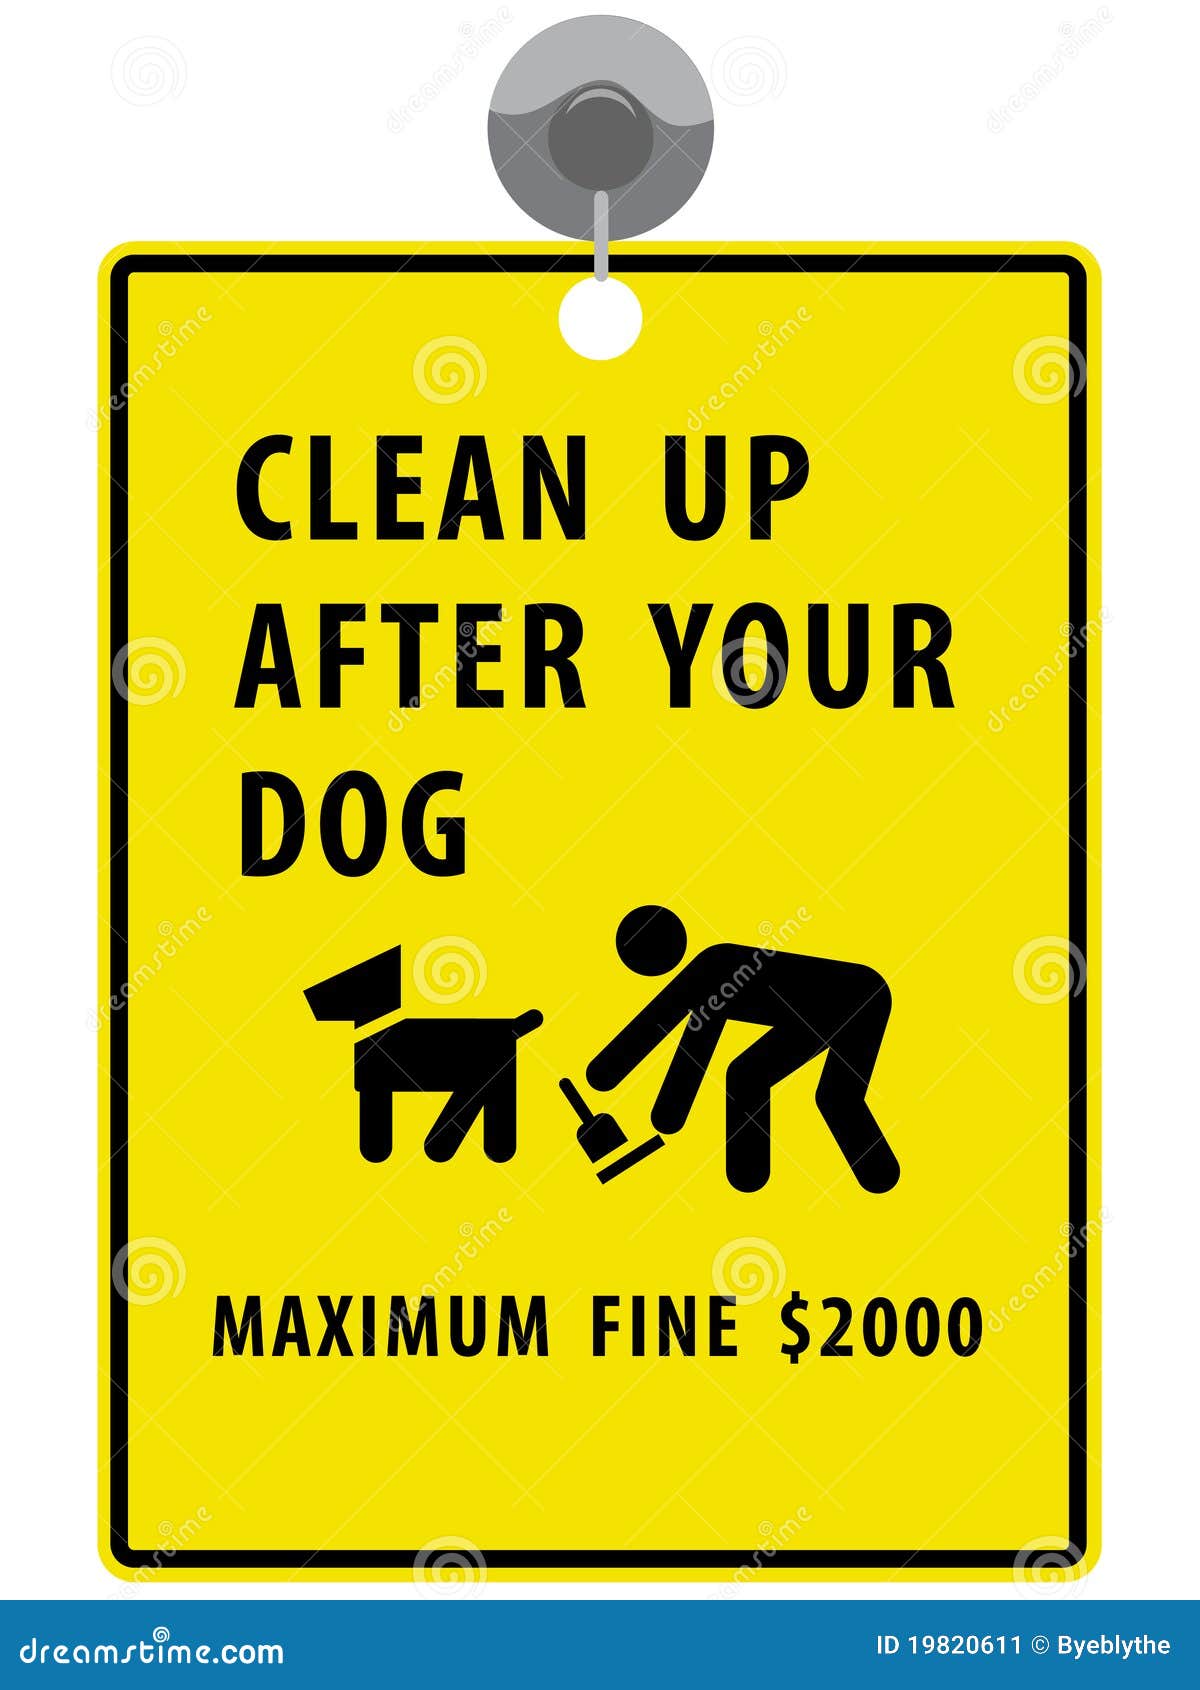 clean-up-after-your-dog-sign-stock-image-image-19820611